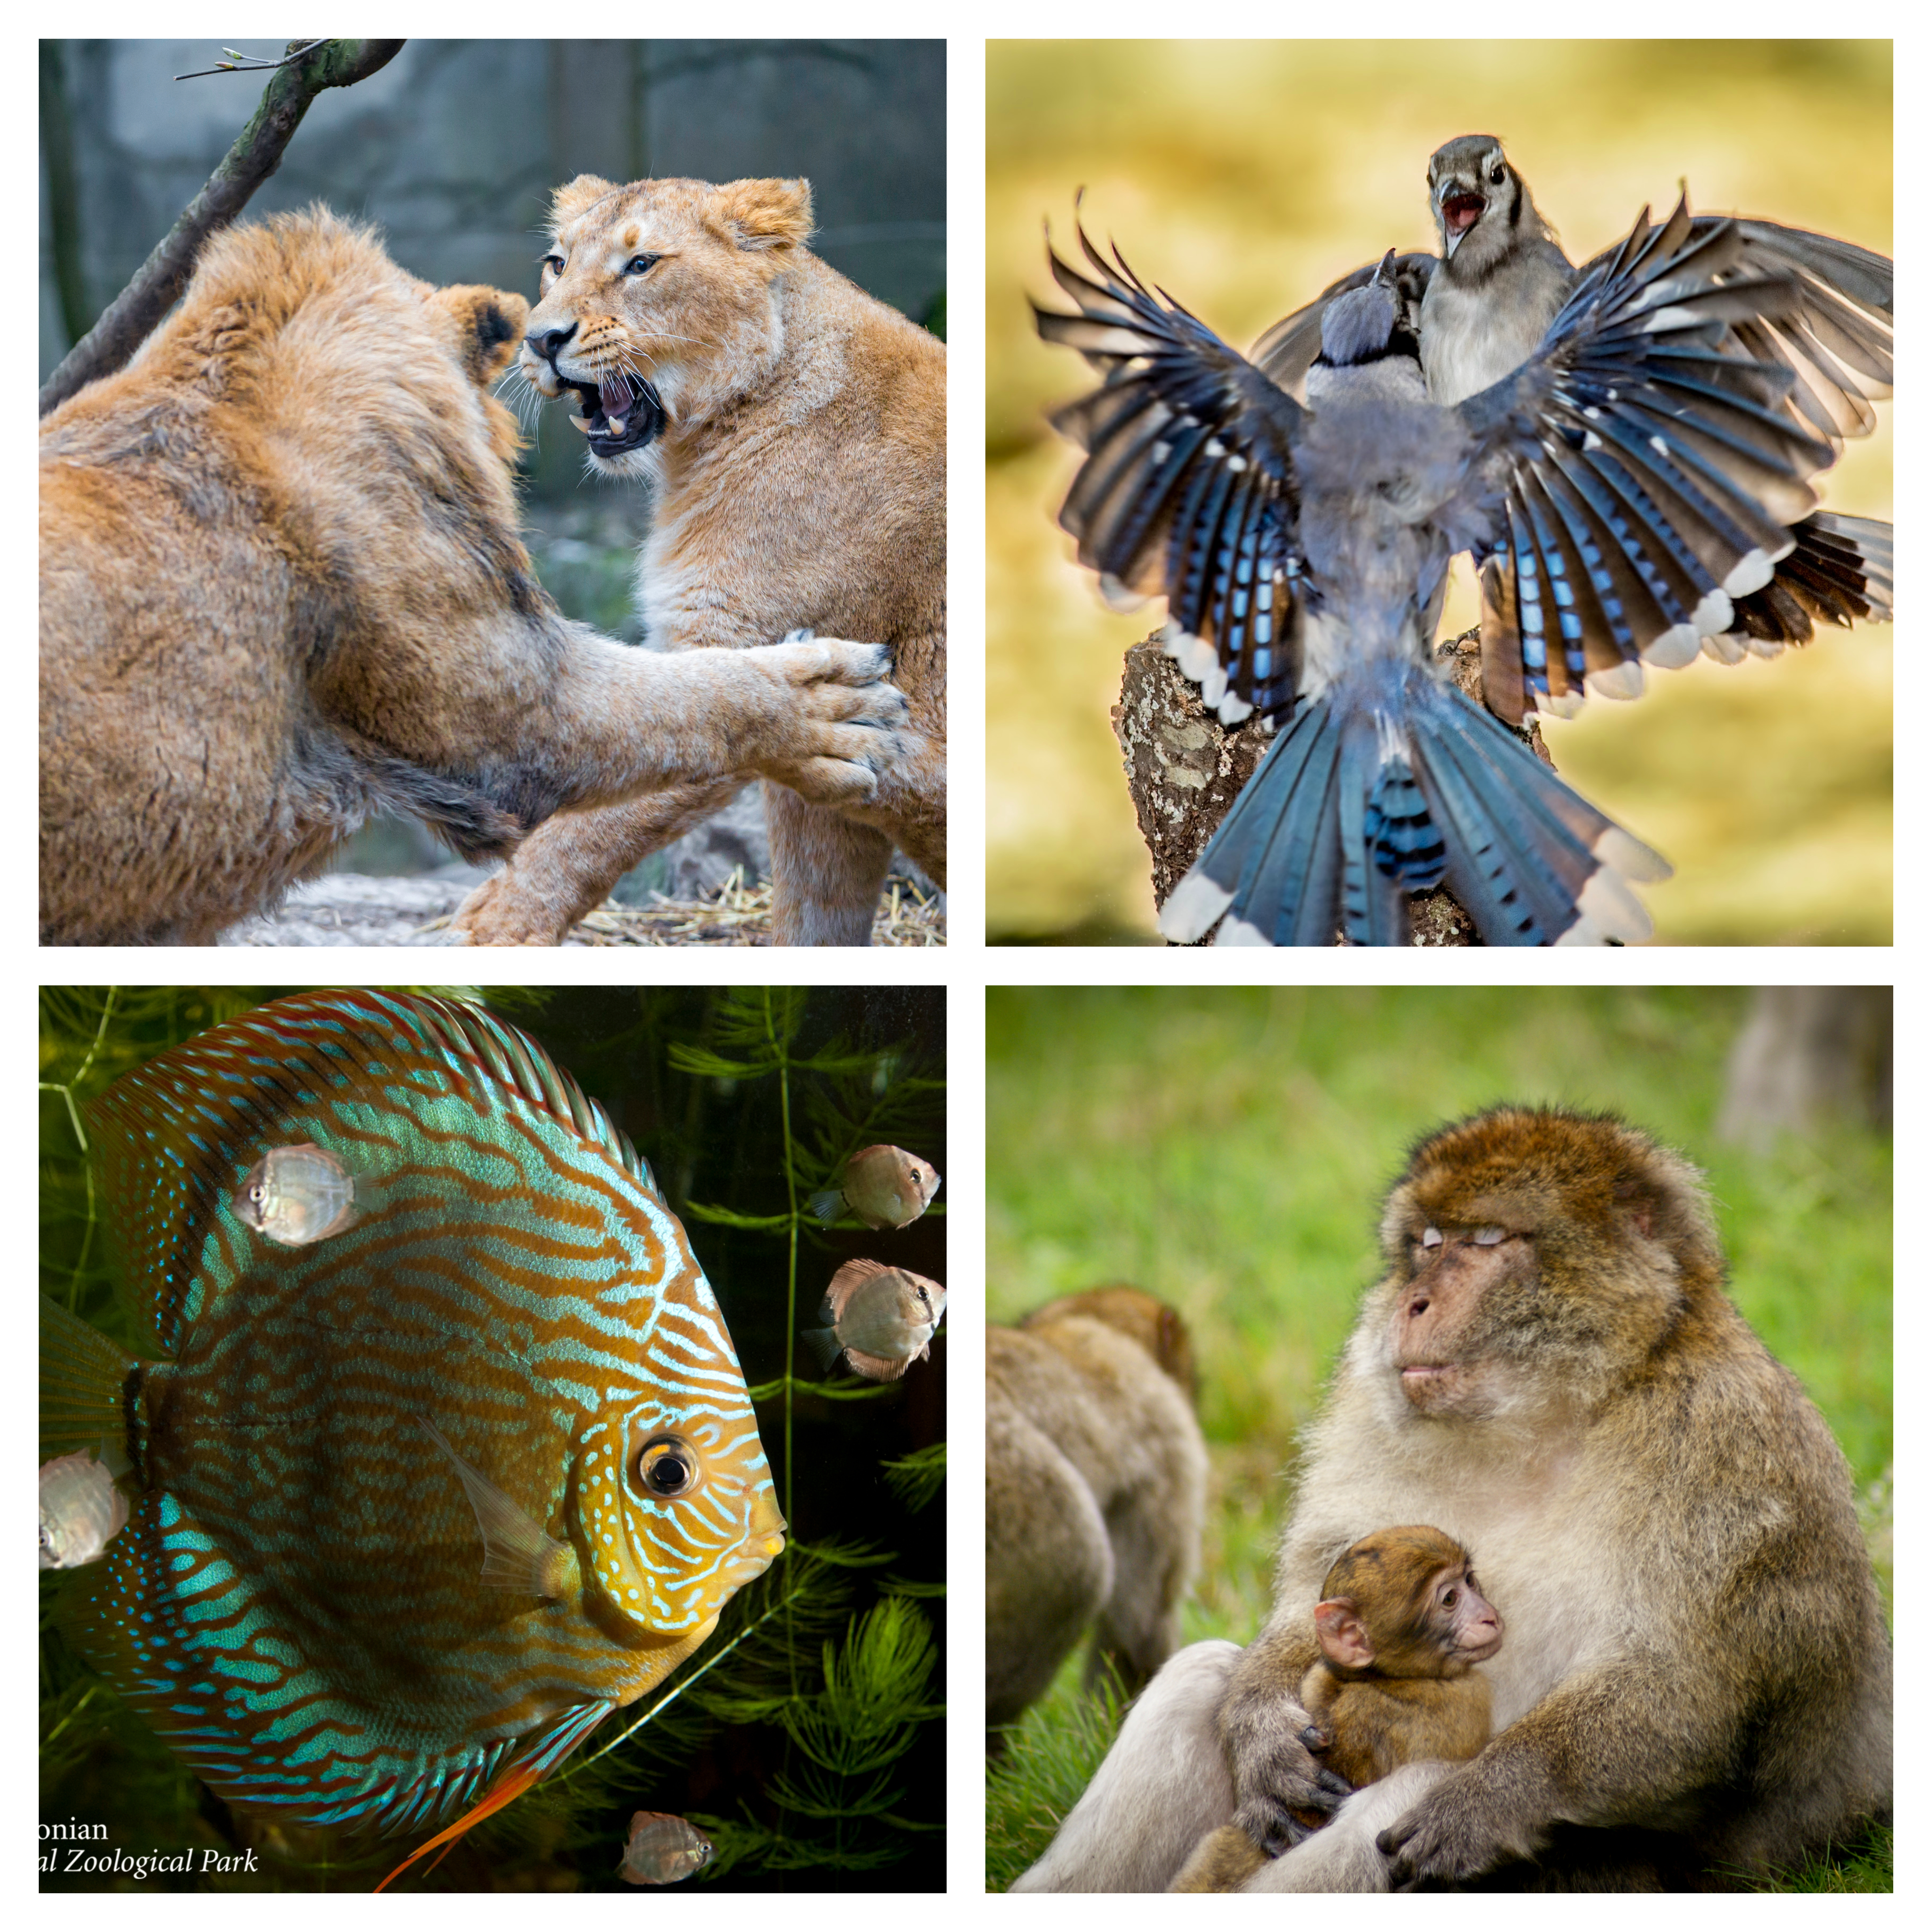 A photograph collage of different animal species displaying aggressive behavior or providing parental care. In the upper left image, two juvenile male lions practice fighting behavior while playing. One lion is growling at the other, and the second lion is lunging towards the other. In the upper right image, two blue jay birds face each other mid-air with their wings spread apart and their beaks open. The two birds have gray beaks, bright blue feathers with a black and white stripe on their backs, and gray feathers on their abdomens. In the lower left image, an adult discus fish swims alongside its tiny juvenile offspring. The adult fish is flat and dark orange in color, with intricate iridescent blue markings along its body. Its offspring are silver in color, with orange fins and a thin black stripe running vertically through their eyes. In the lower right image, an adult Barbary macaque embraces a small infant. Both macaques have light pink faces and golden-colored fur.